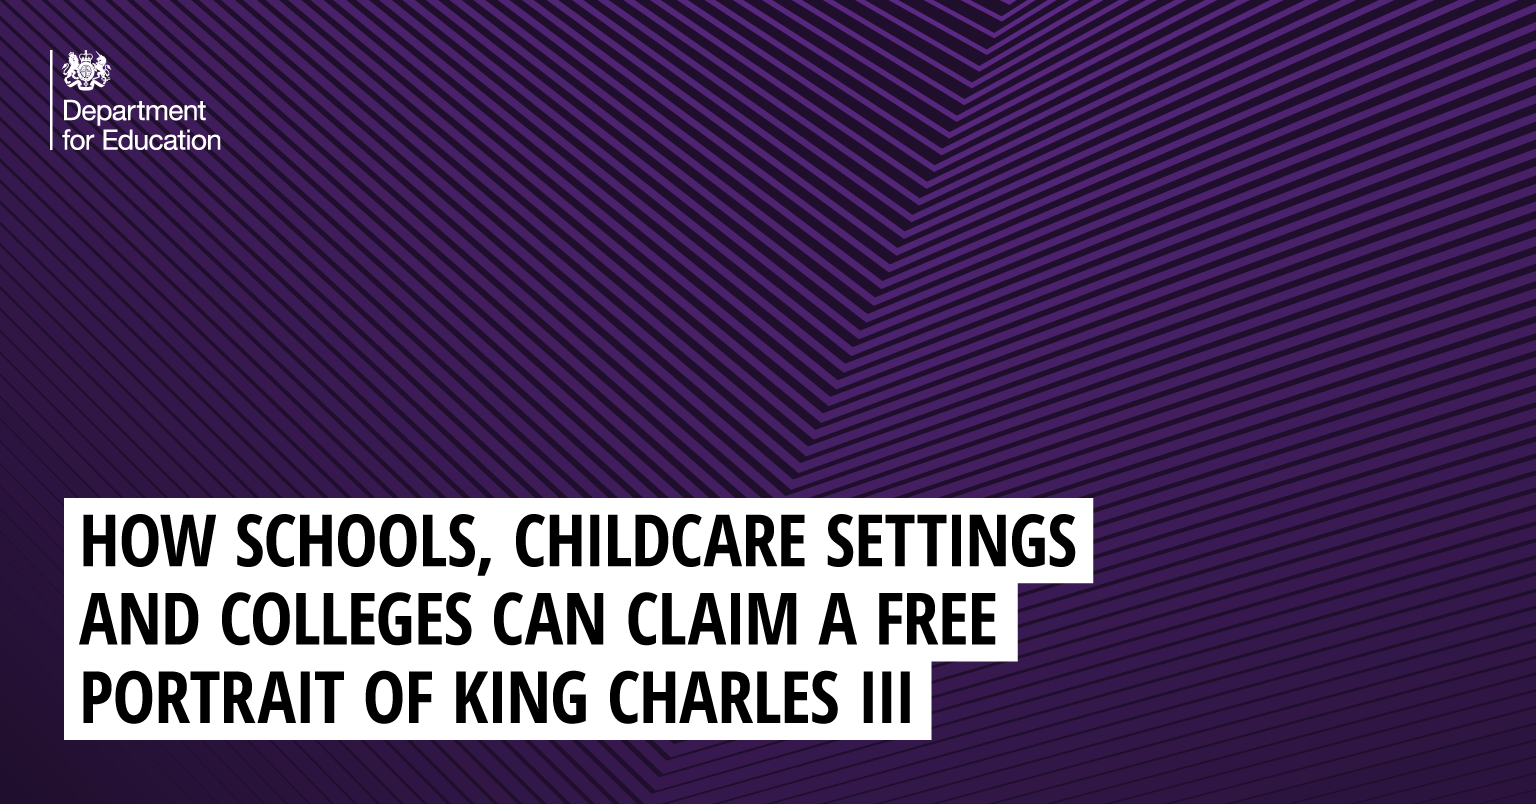 How schools, childcare settings and colleges can claim a free portrait of King Charles III  